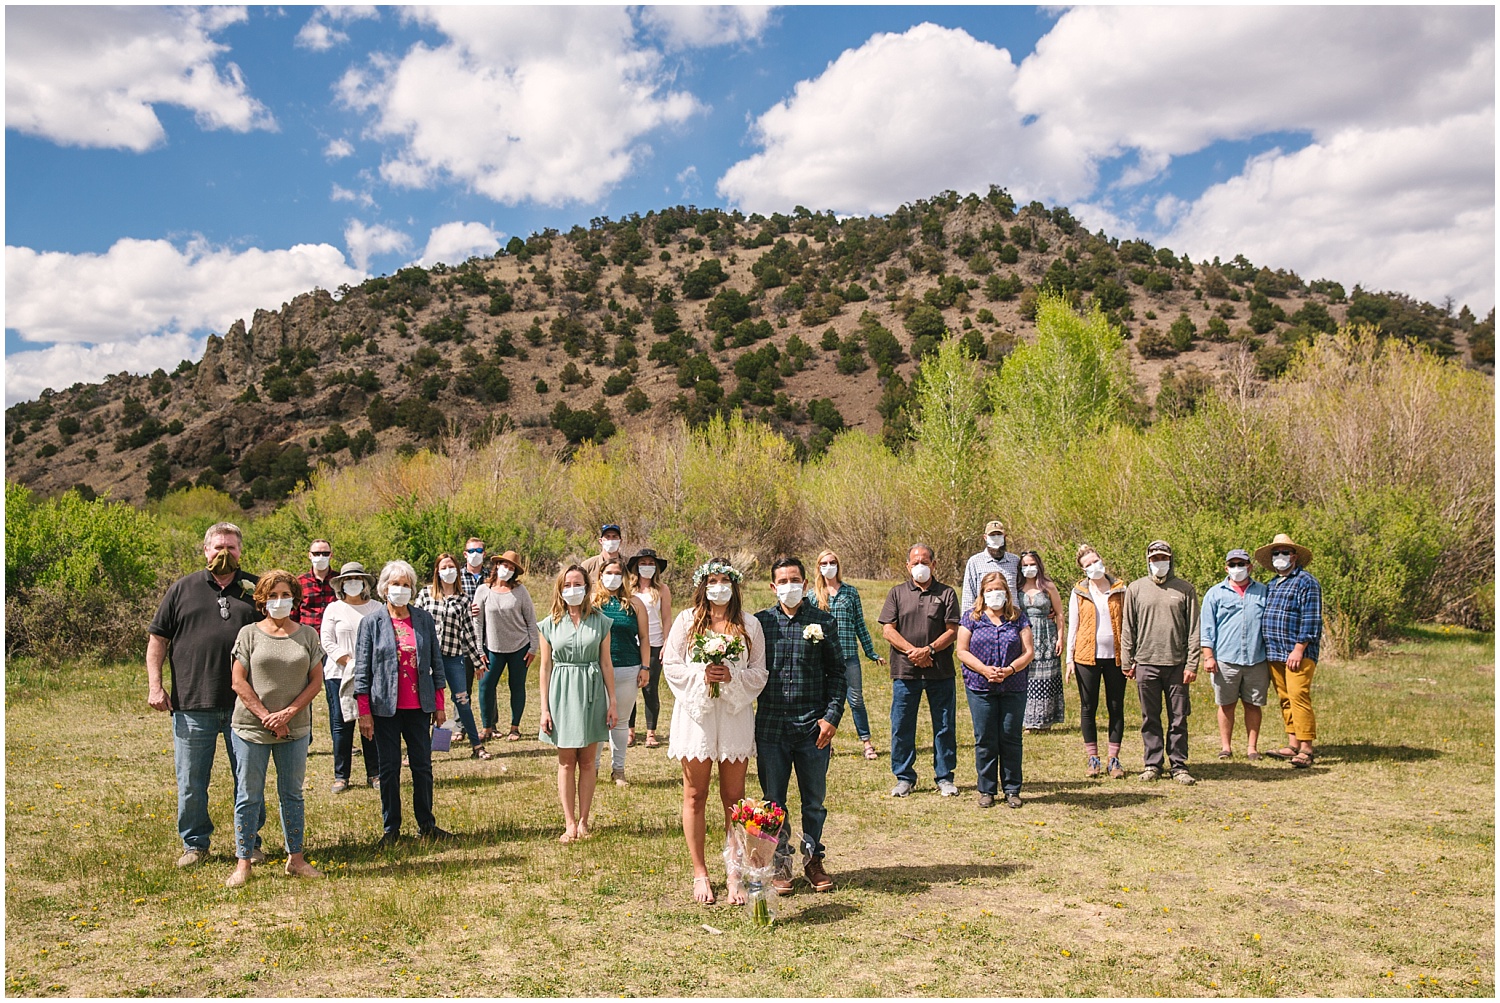 Everyone in masks at campsite elopement in backcountry Rio Grande National Forest